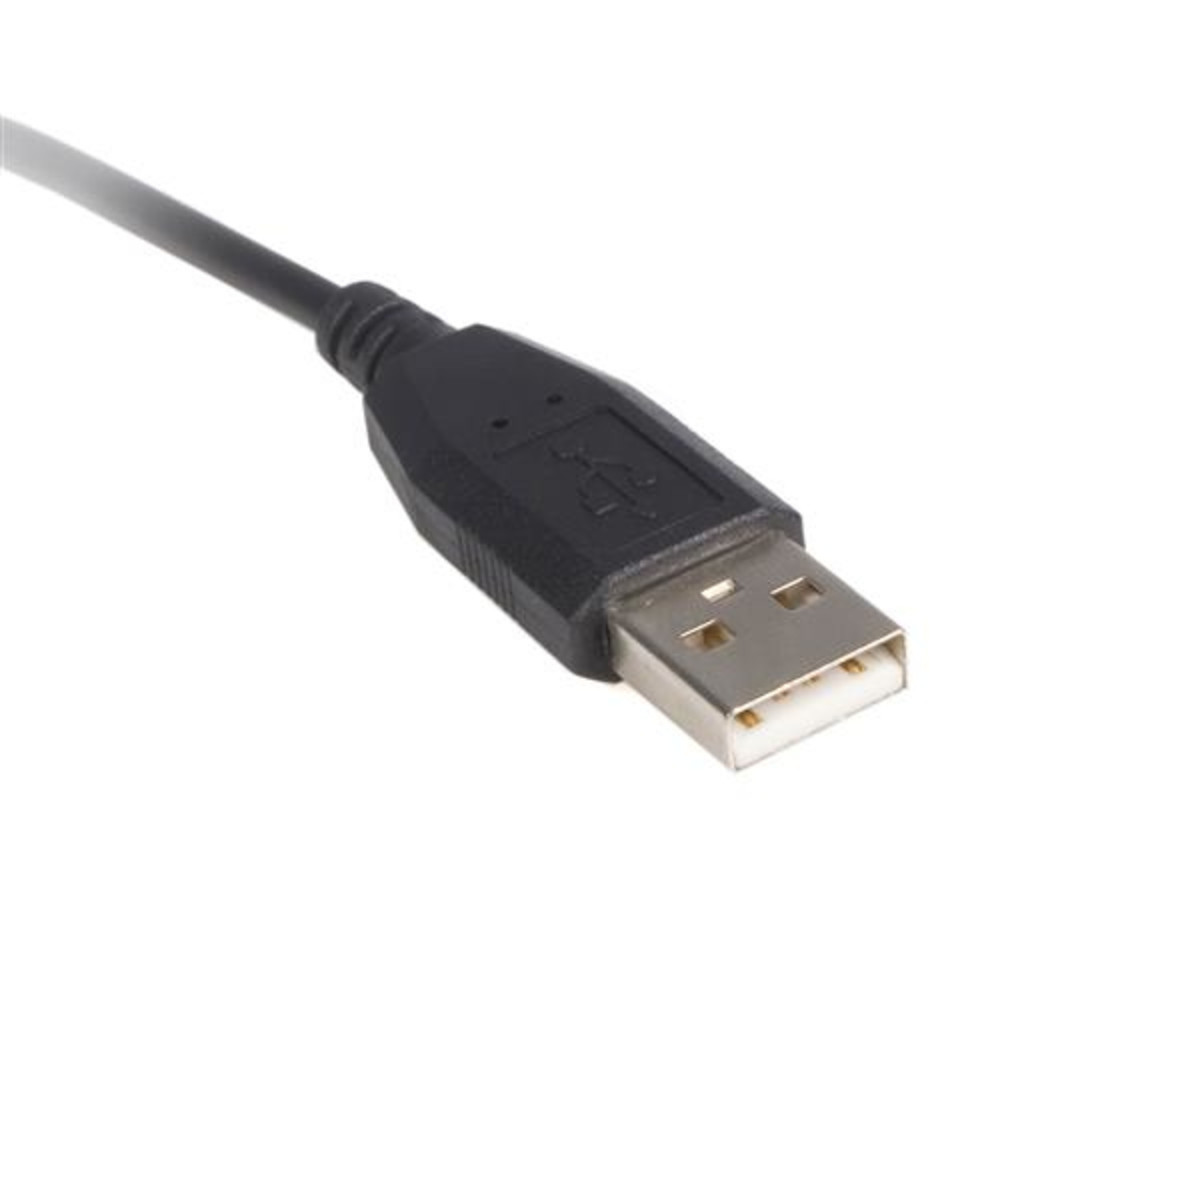 USB to PS2 Keyboard and Mouse Adapter